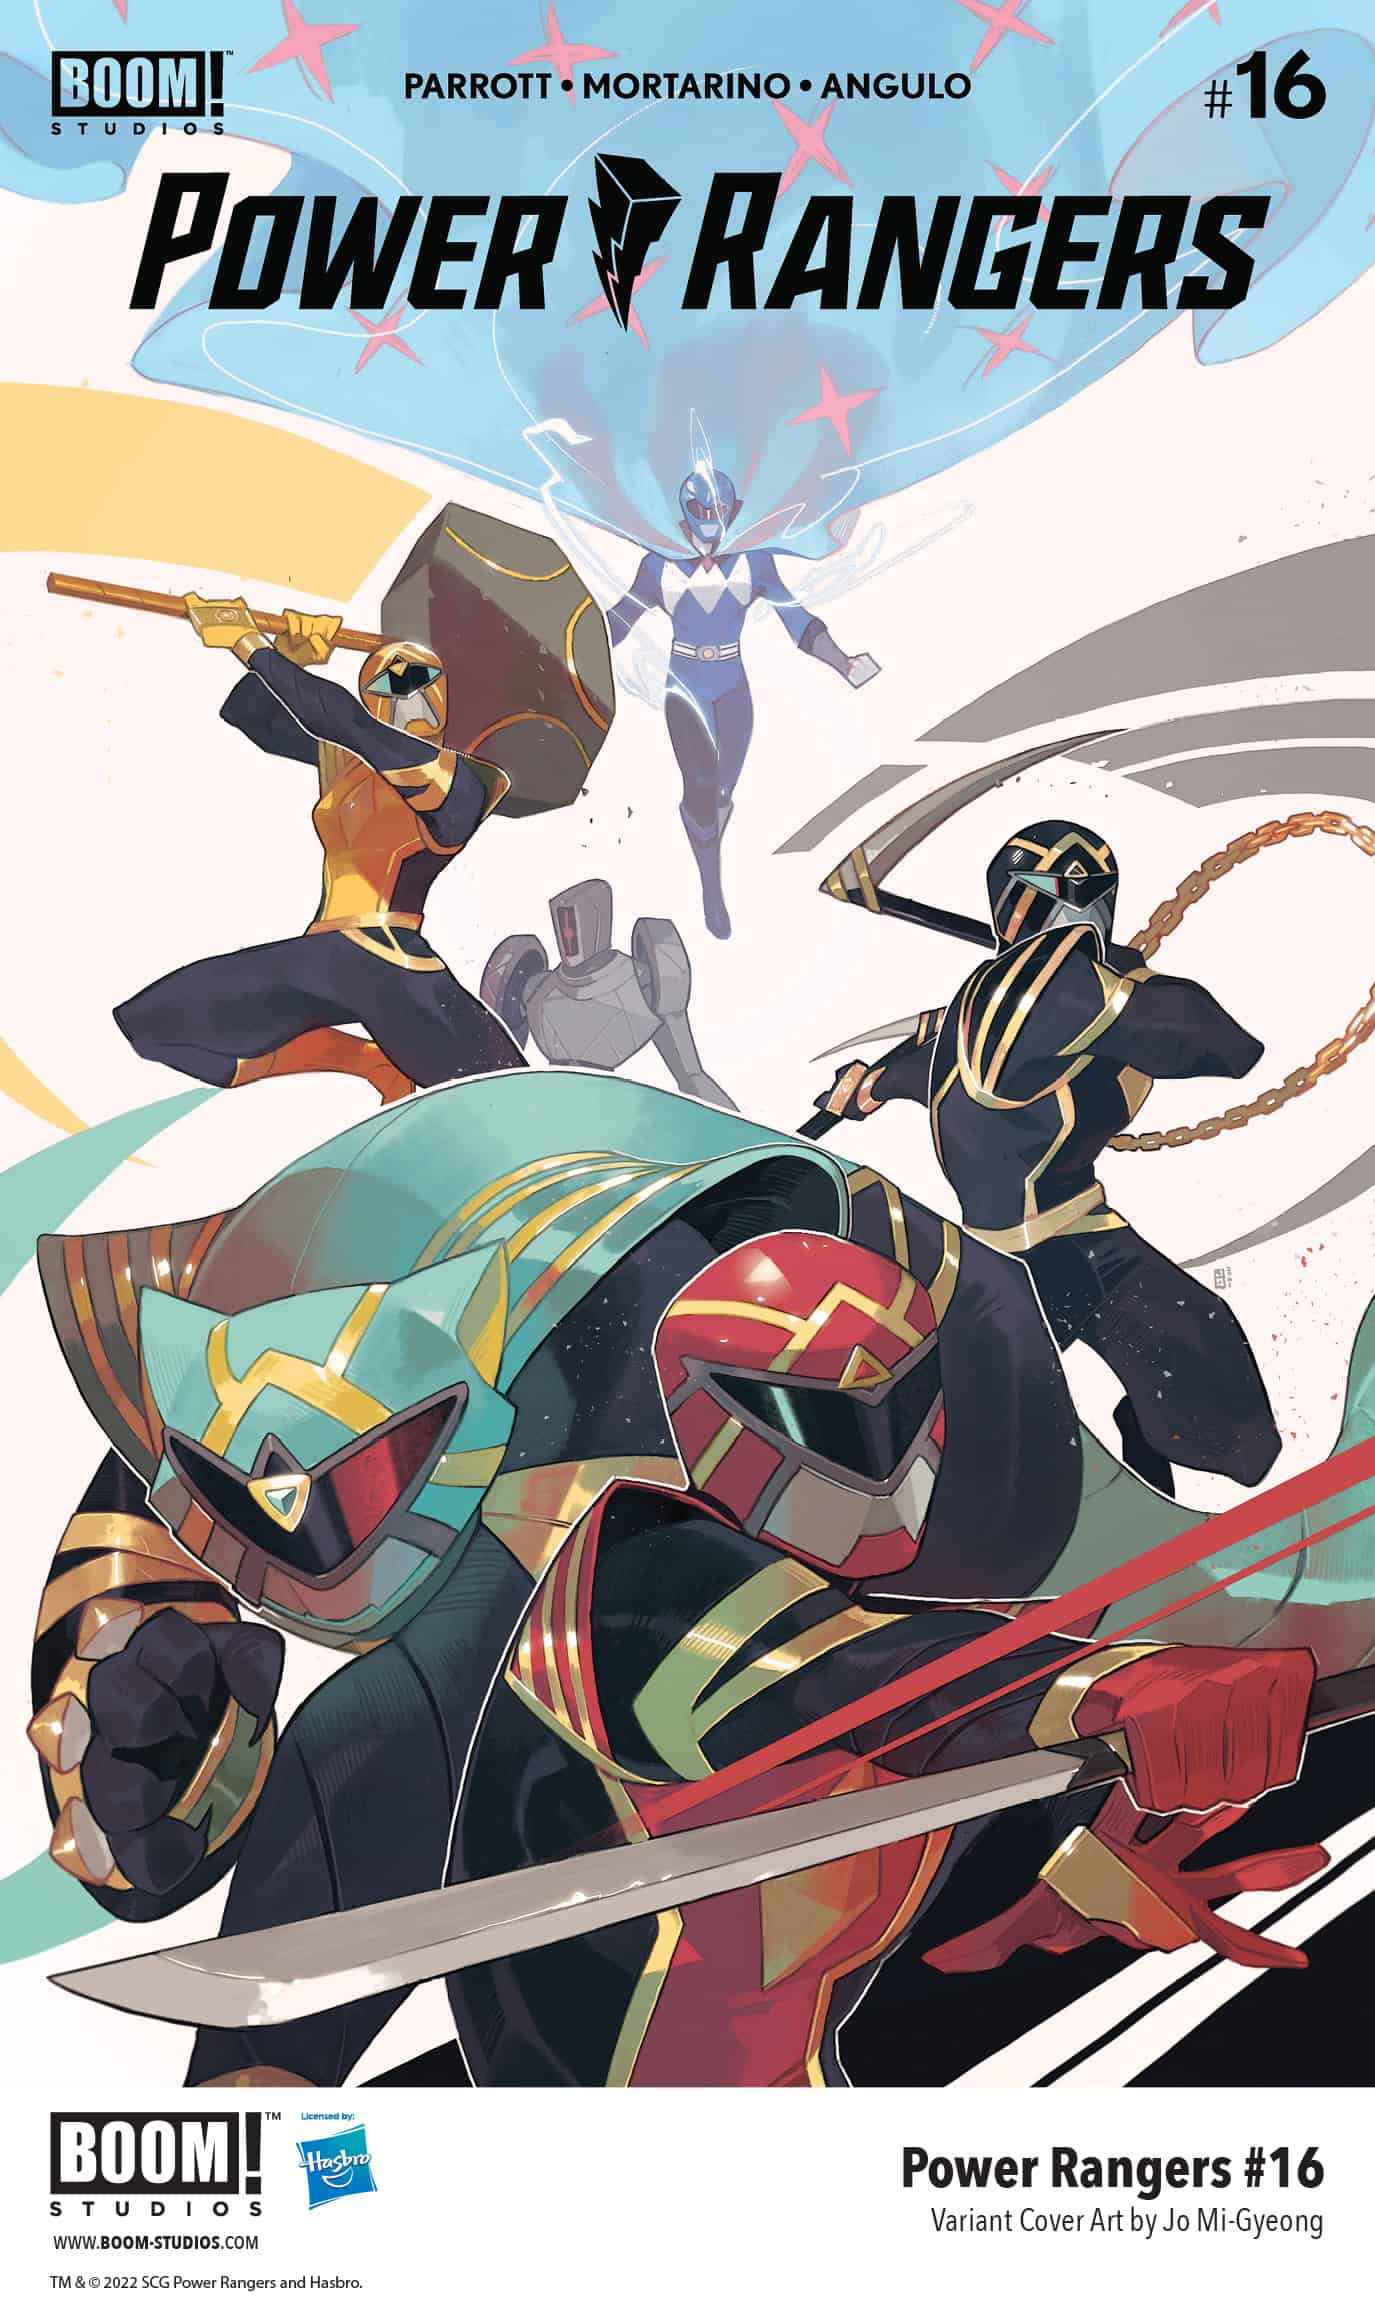 NEWS WATCH: BOOM! STUDIOS Releases the First Look at POWER RANGERS #16 out  in February 2022 - Comic Watch